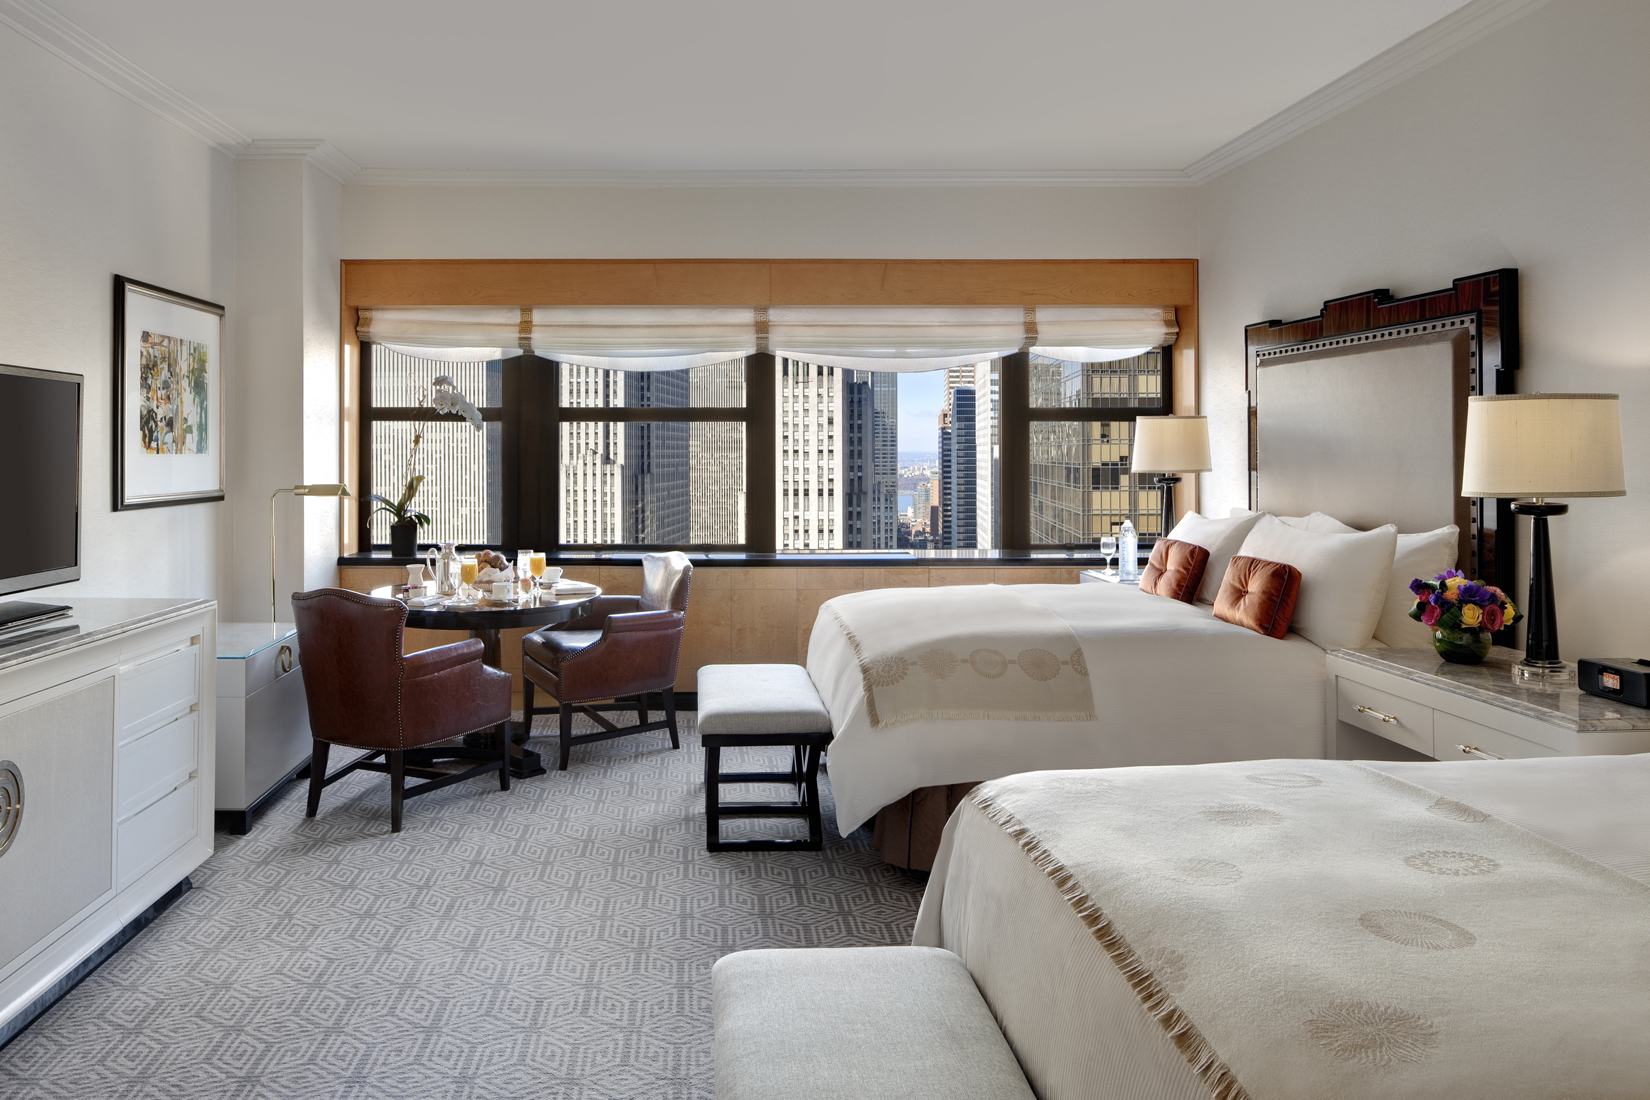 Give Thanks For Low Rates This Thanksgiving at Lotte New York Palace | Midtown Manhattan Hotels ...